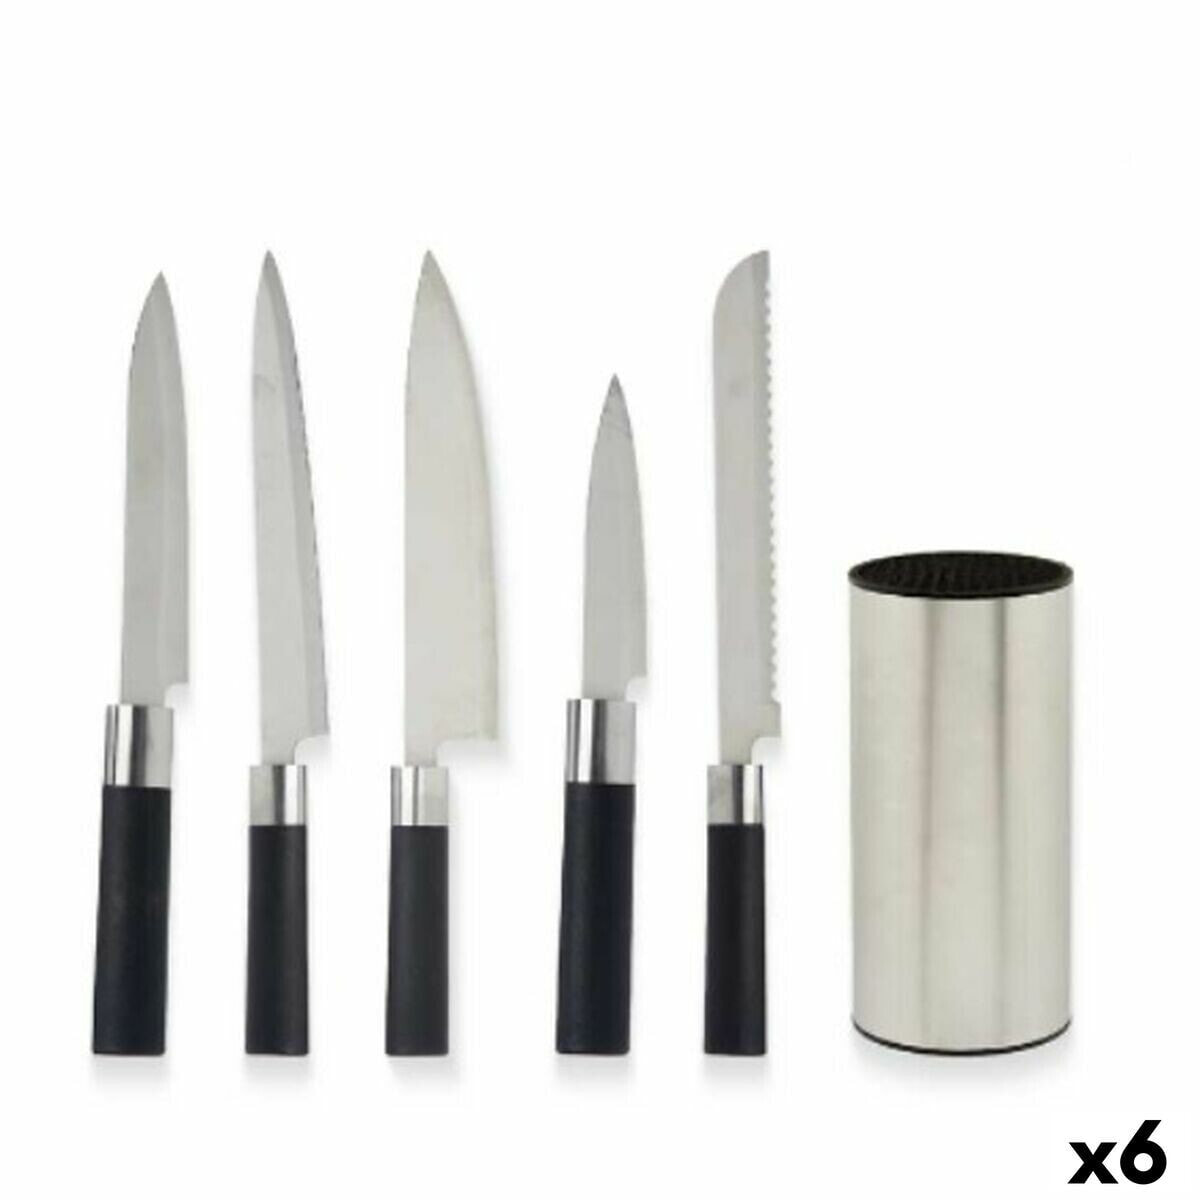 Set of Kitchen Knives and Stand Black Silver Stainless steel Polyethylene polypropylene ABS 11 x 35 x 11 cm (6 Units)